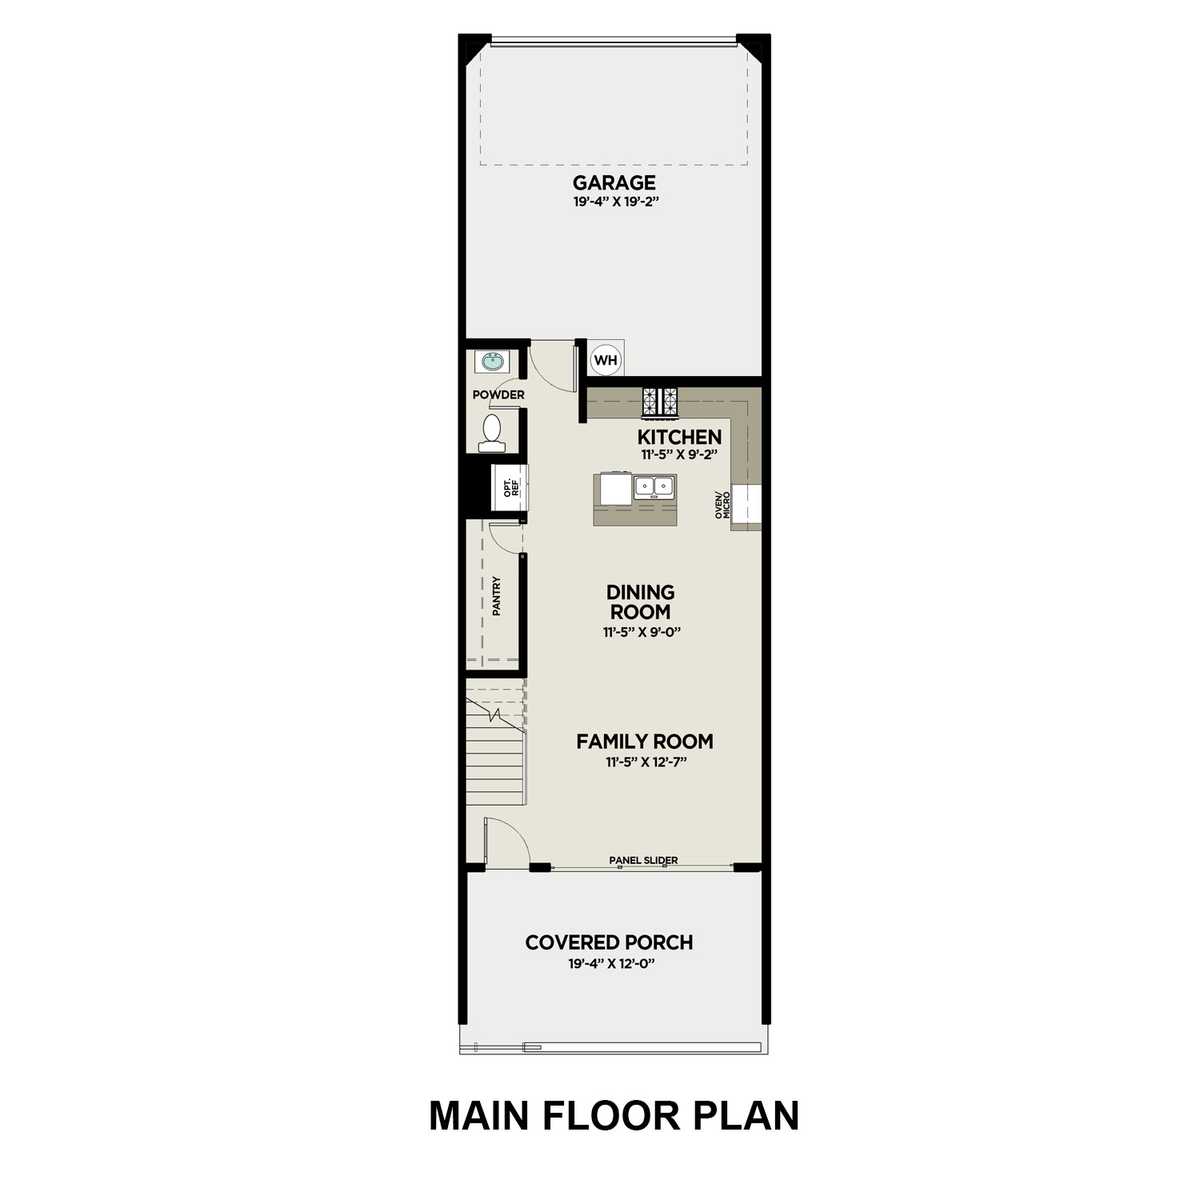 1 - The Seacrest B floor plan layout for 613 Stickley Oak Way in Davidson Homes' The Village at Towne Lake community.